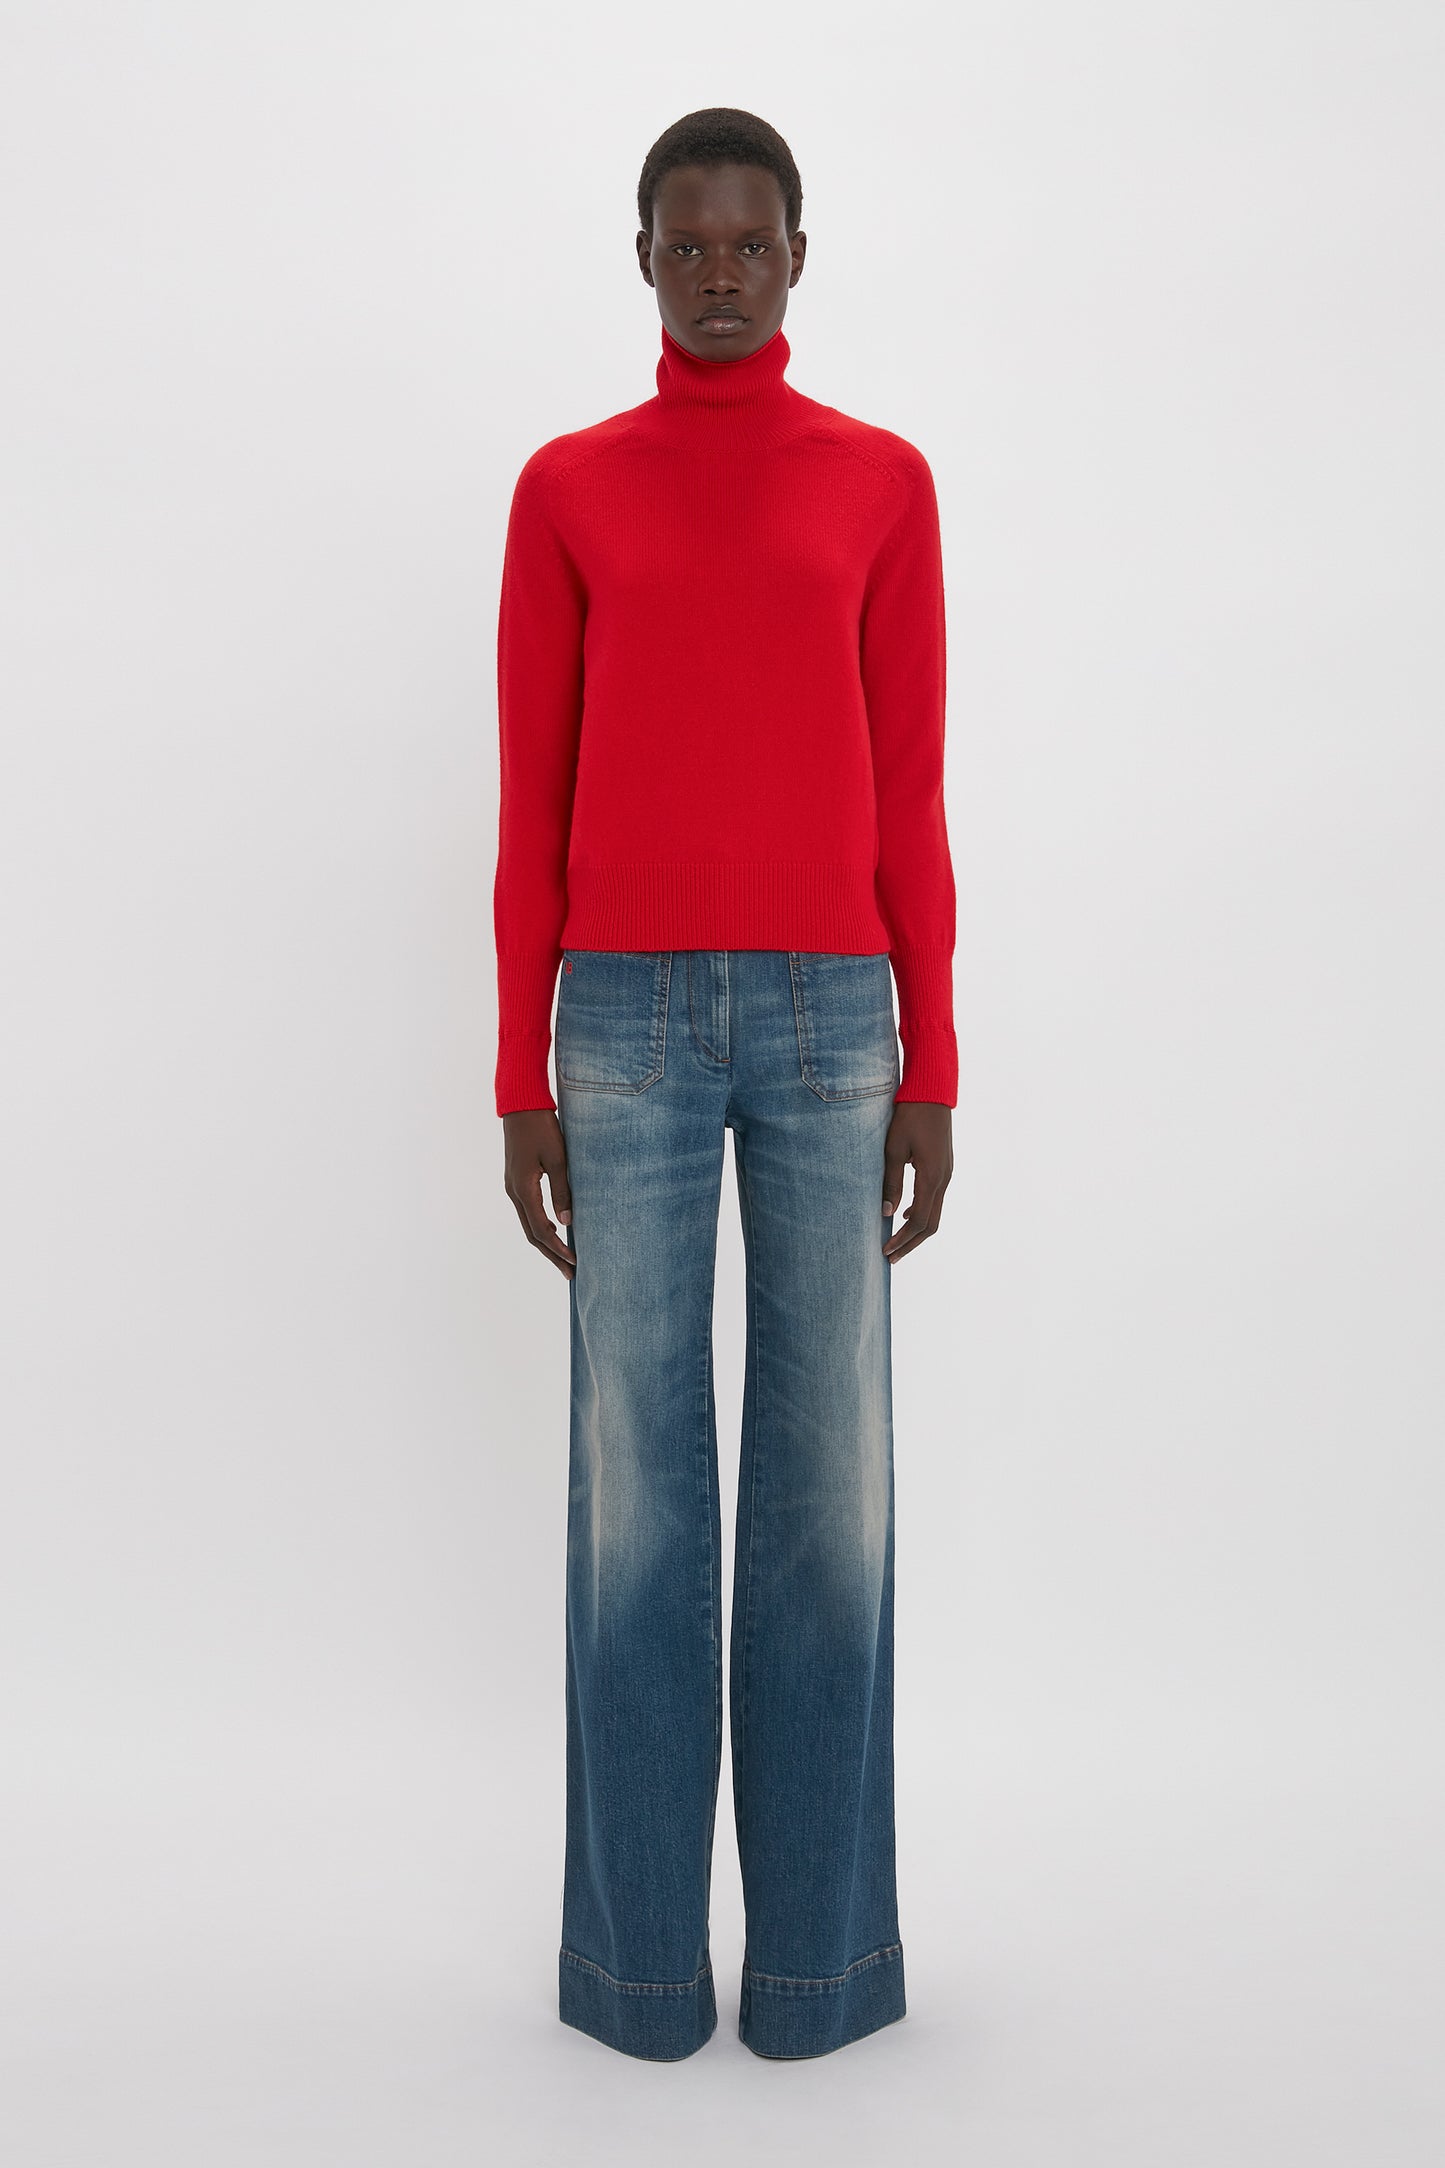 A black man wearing a red turtleneck sweater and Victoria Beckham's Alina Jean In Heavy Vintage Indigo Wash stands against a white background.